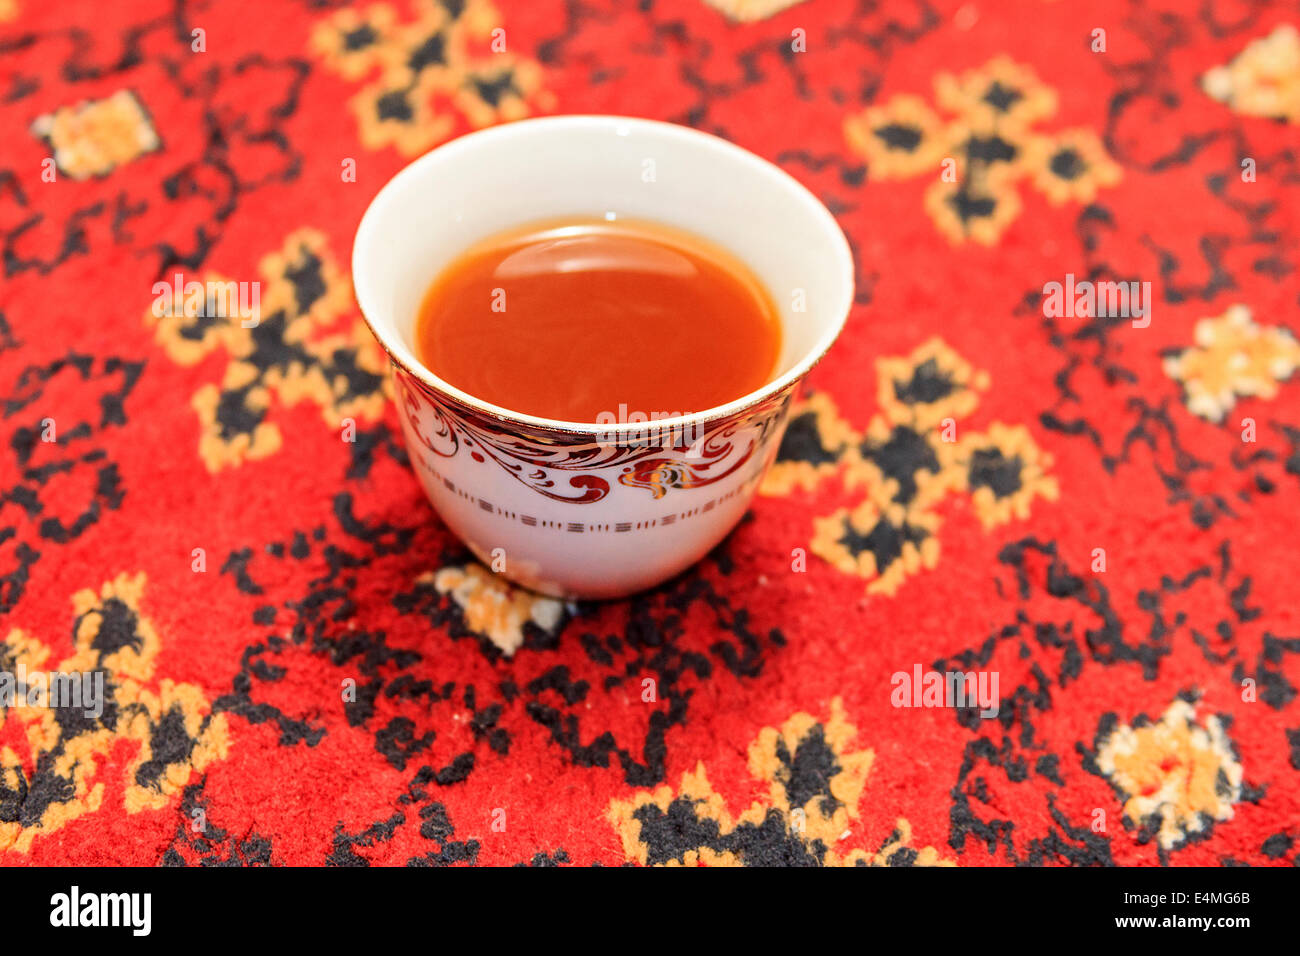 Cup of Arab tea against a colorful rug. Stock Photo